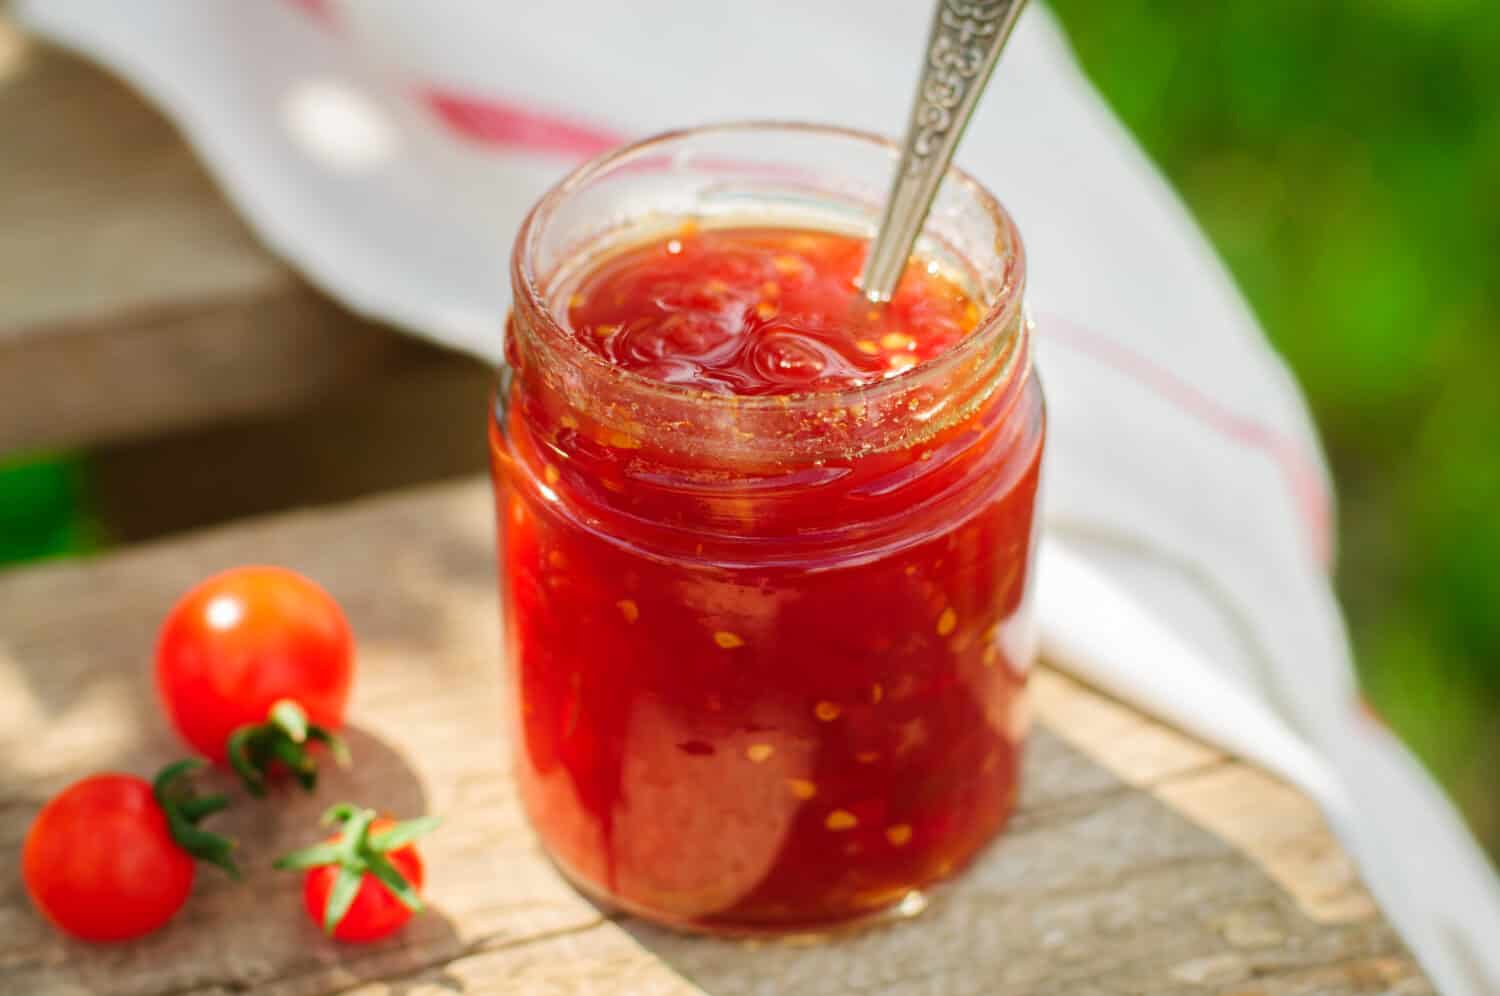 Tomato and Chili Jam Preserves in a Clear Jar, copy space for your text